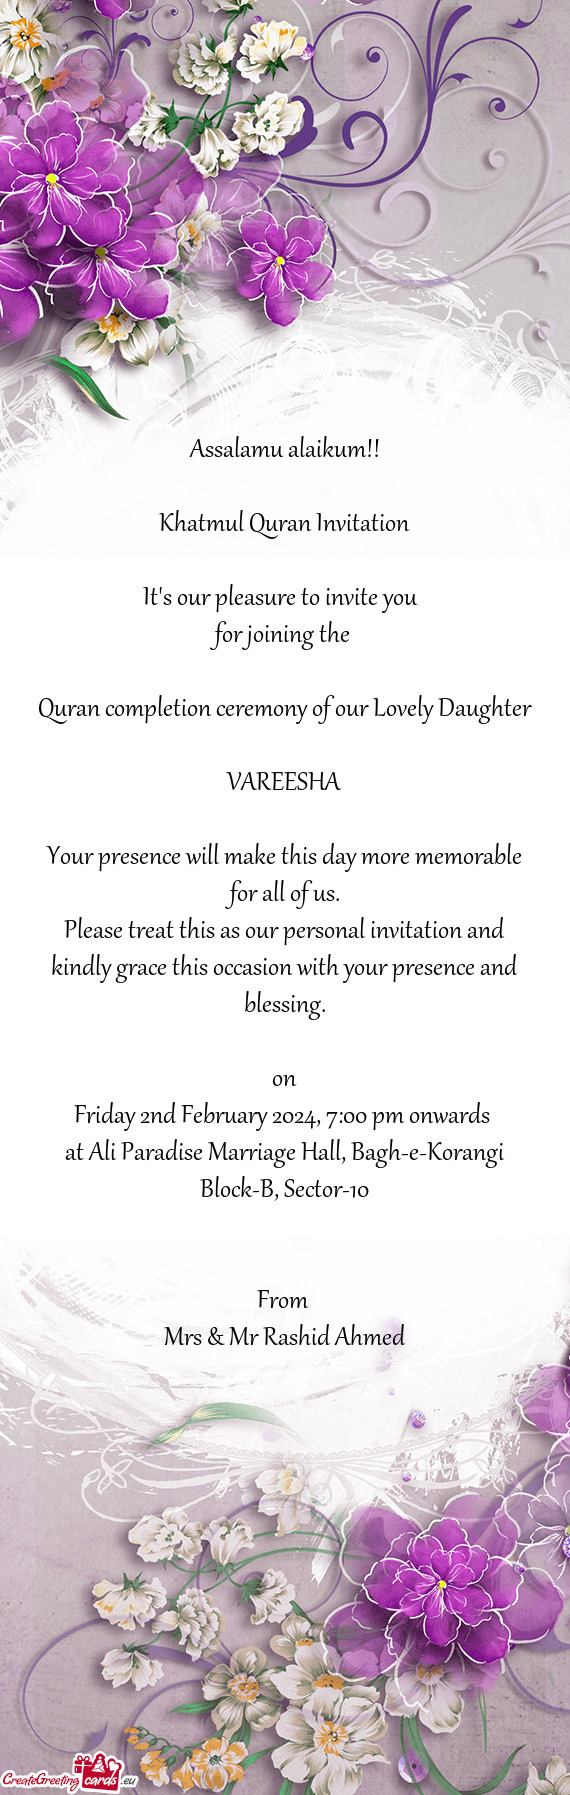 Quran completion ceremony of our Lovely Daughter